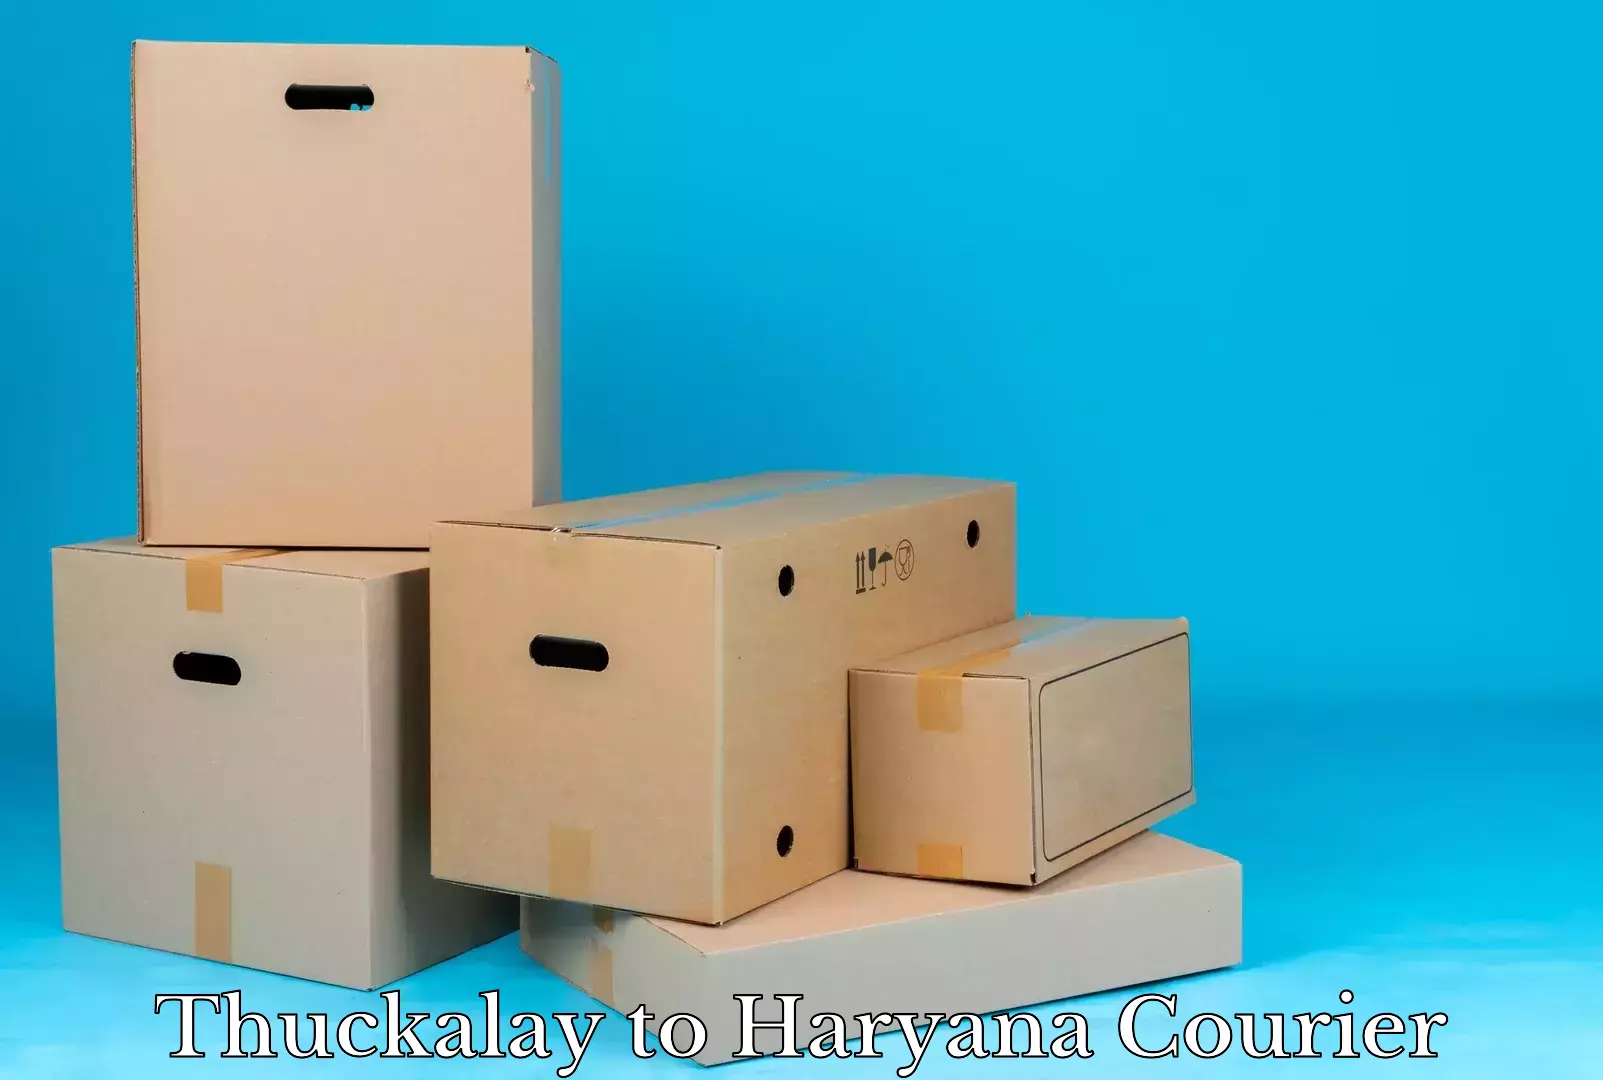 Quality relocation services in Thuckalay to Ambala